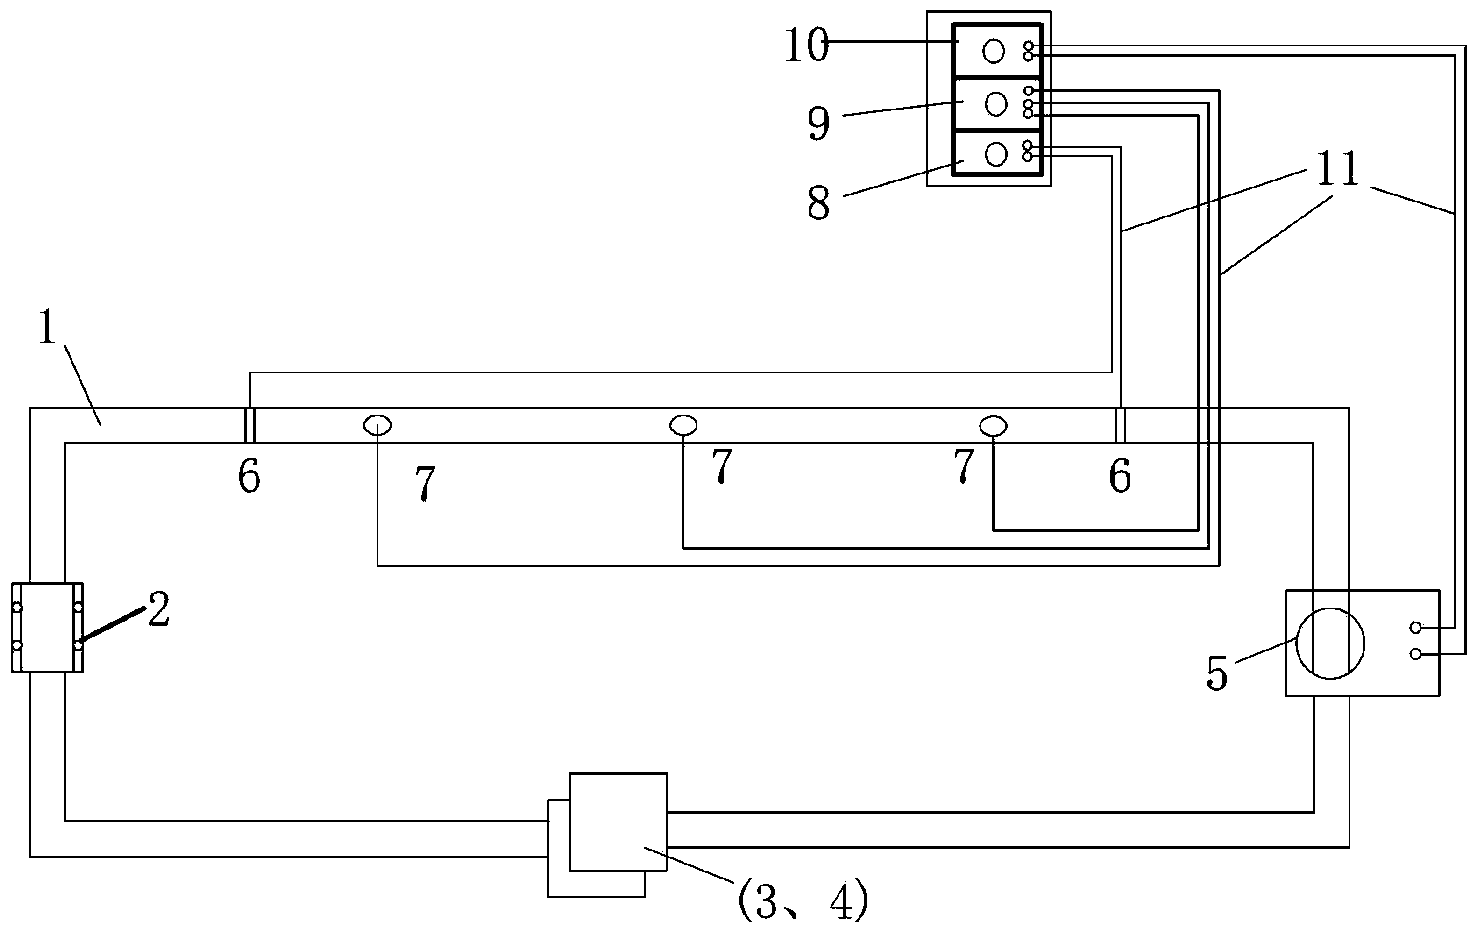 Measurement method for alternating-current resistance of cable conductor